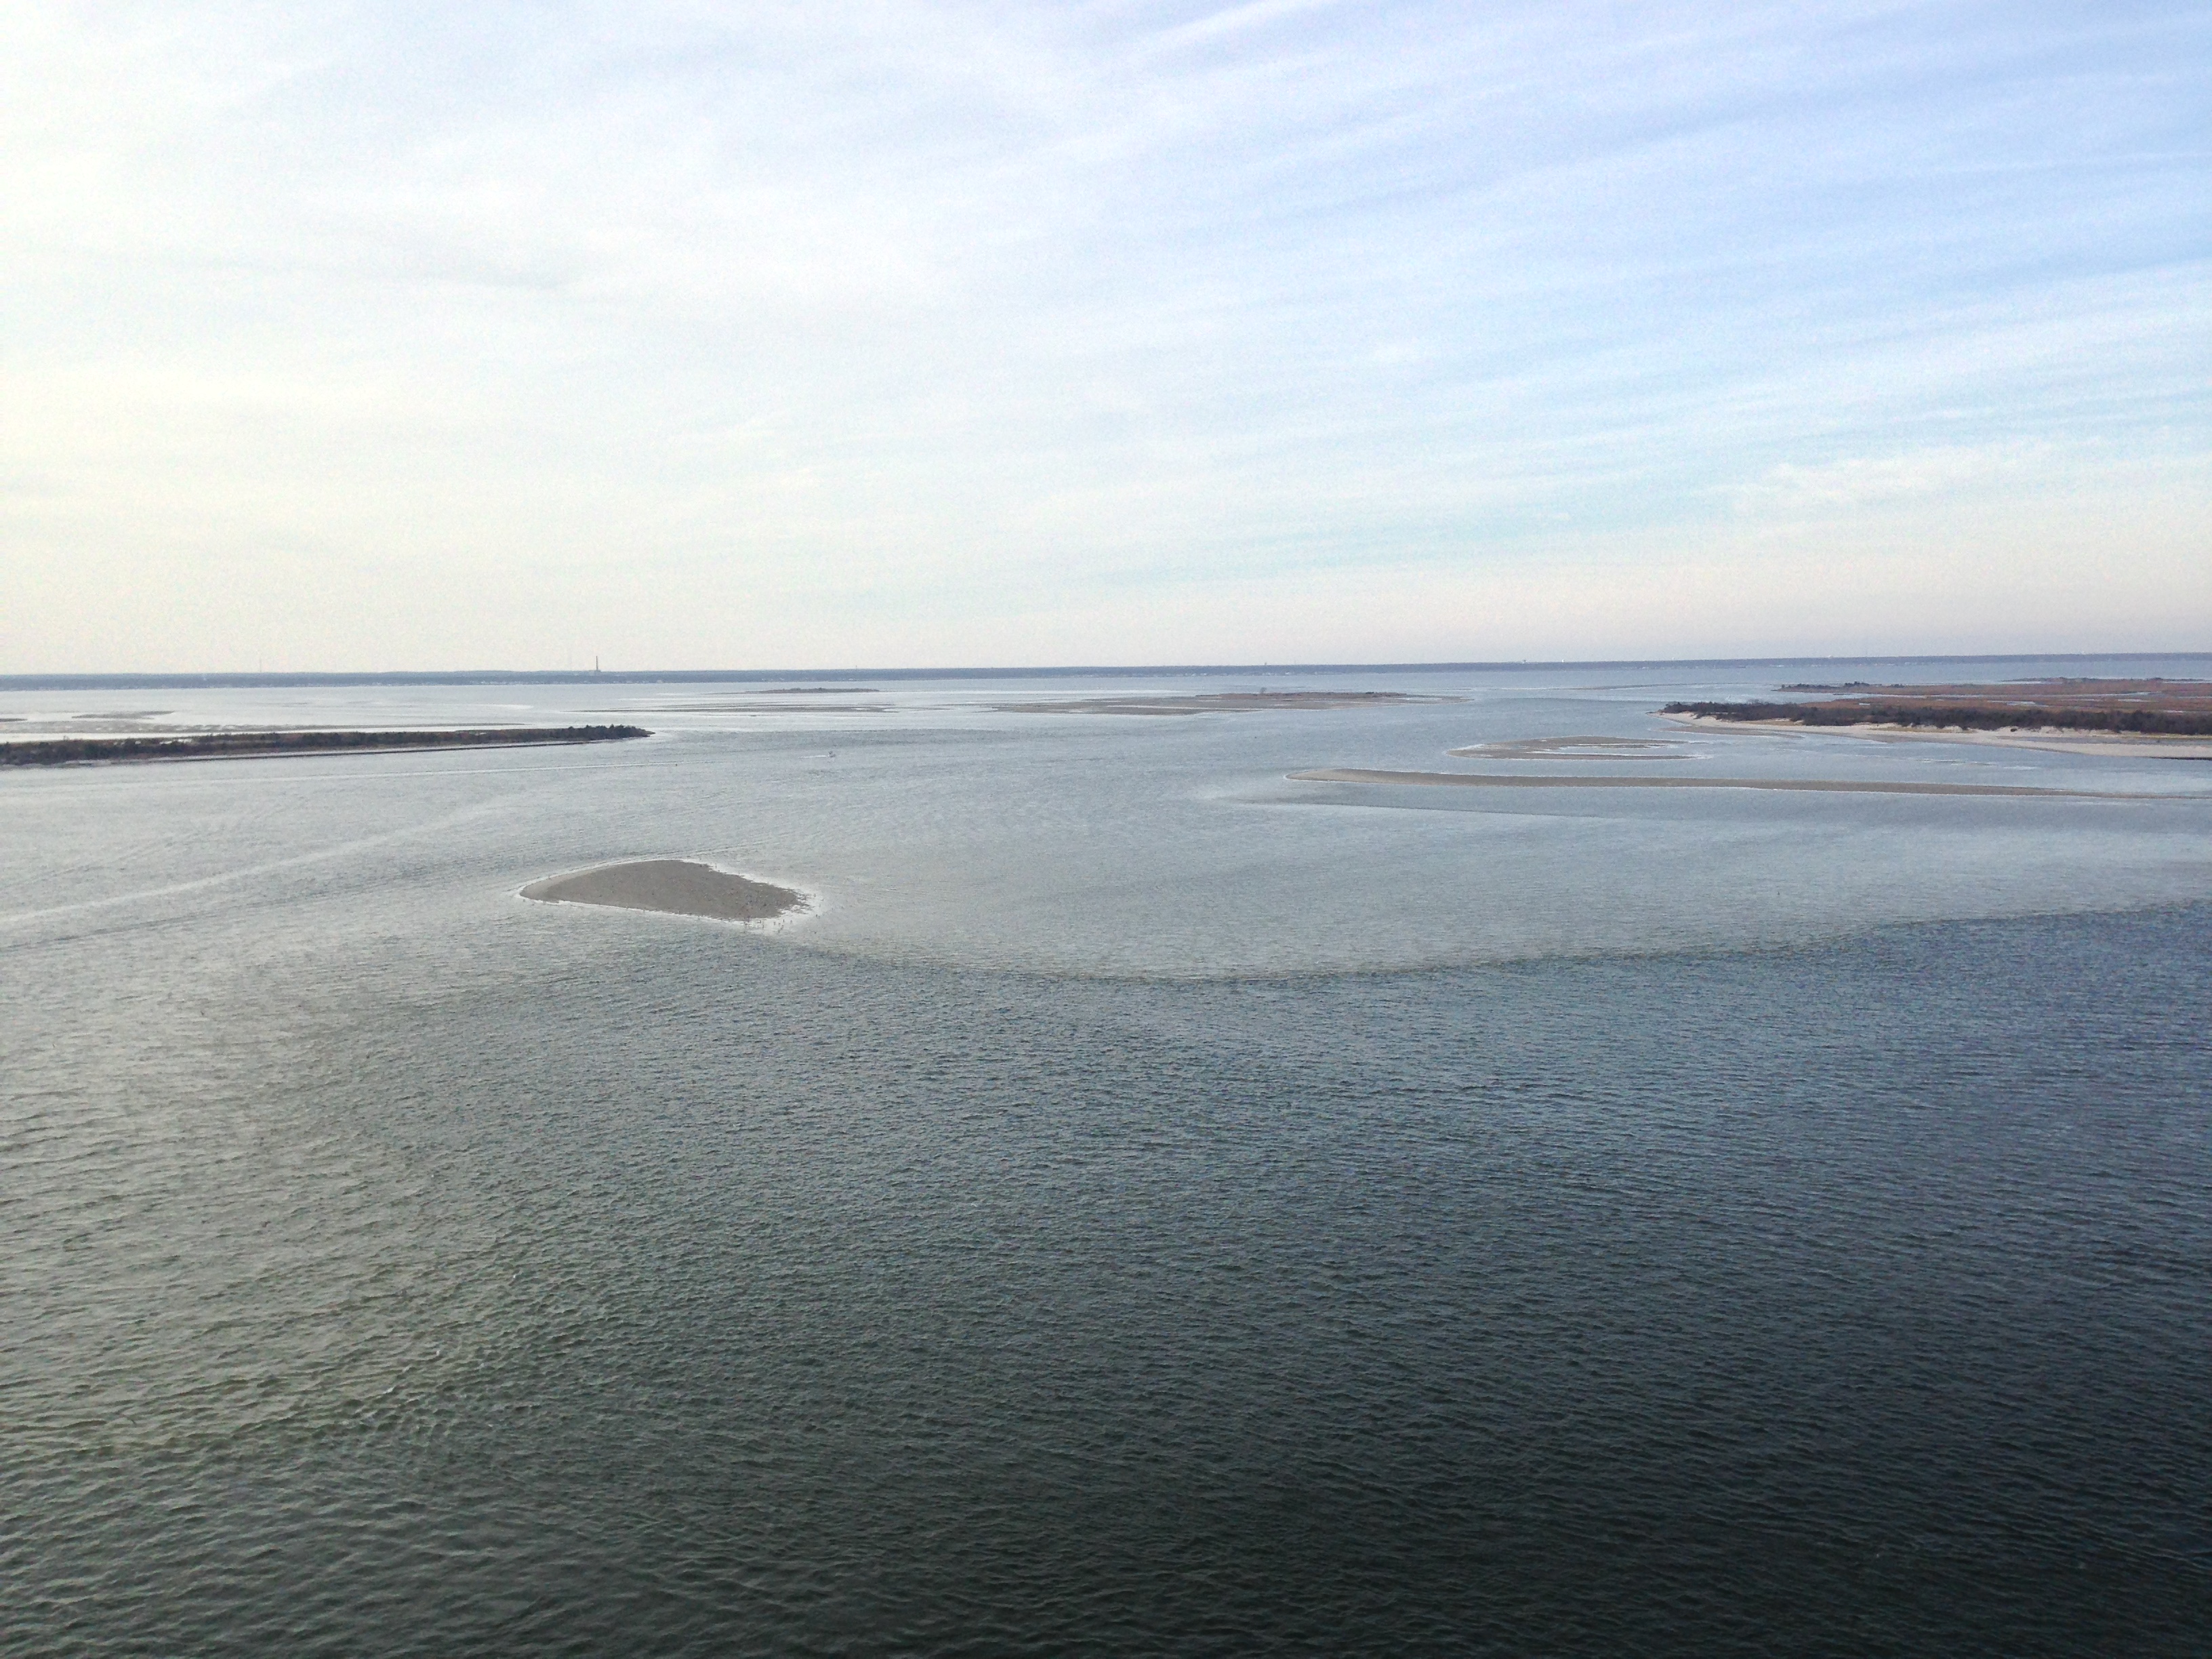 The Oyster Creek Channel, which leads from Barnegat Bay to Barnegat Inlet. (Photo: Daniel Nee)